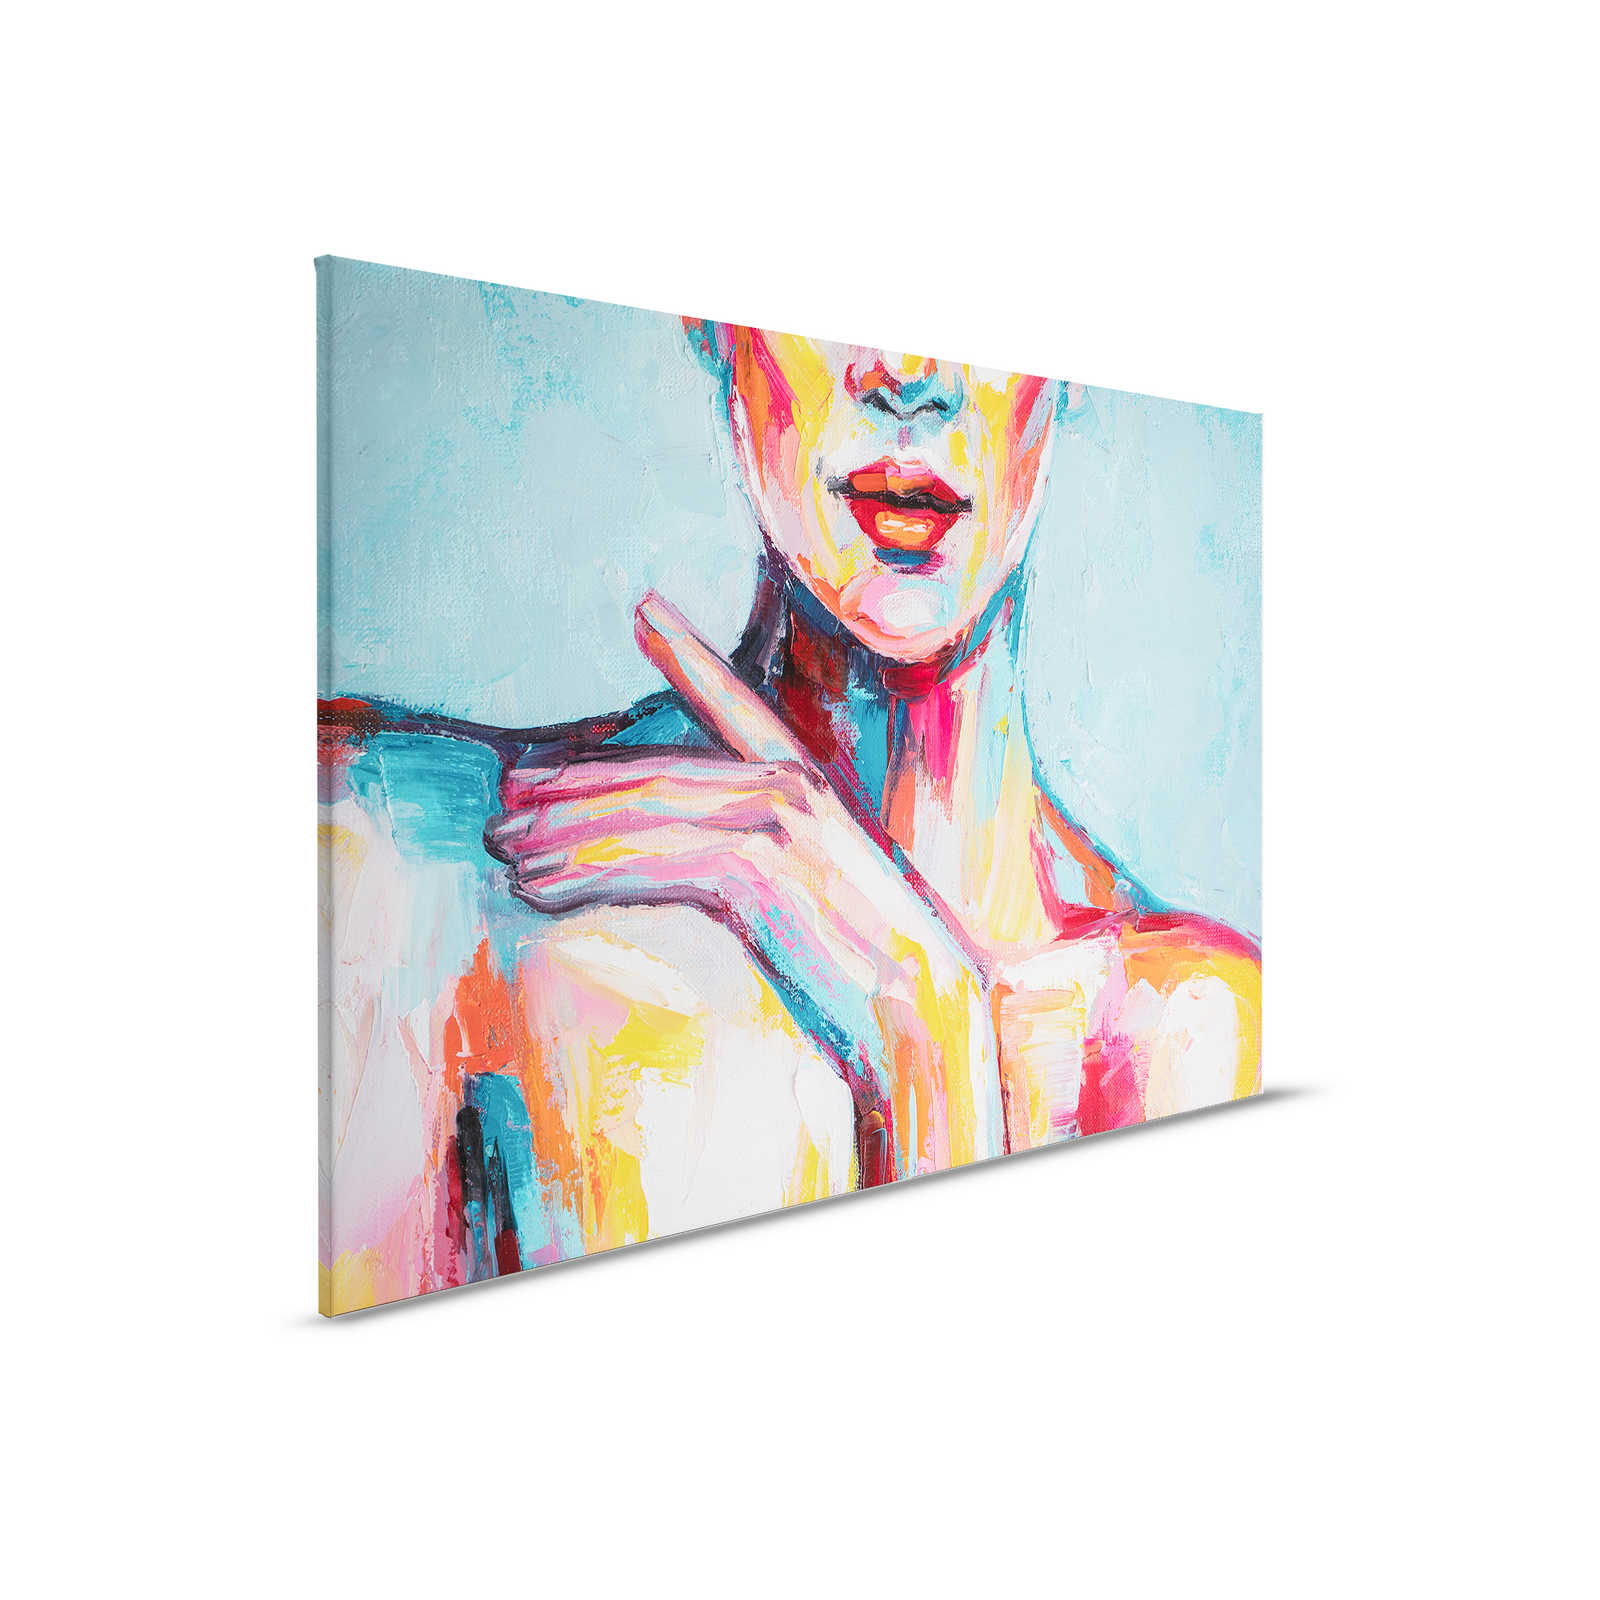         Canvas painting Acrylic Drawing of a Woman - 0,90 m x 0,60 m
    